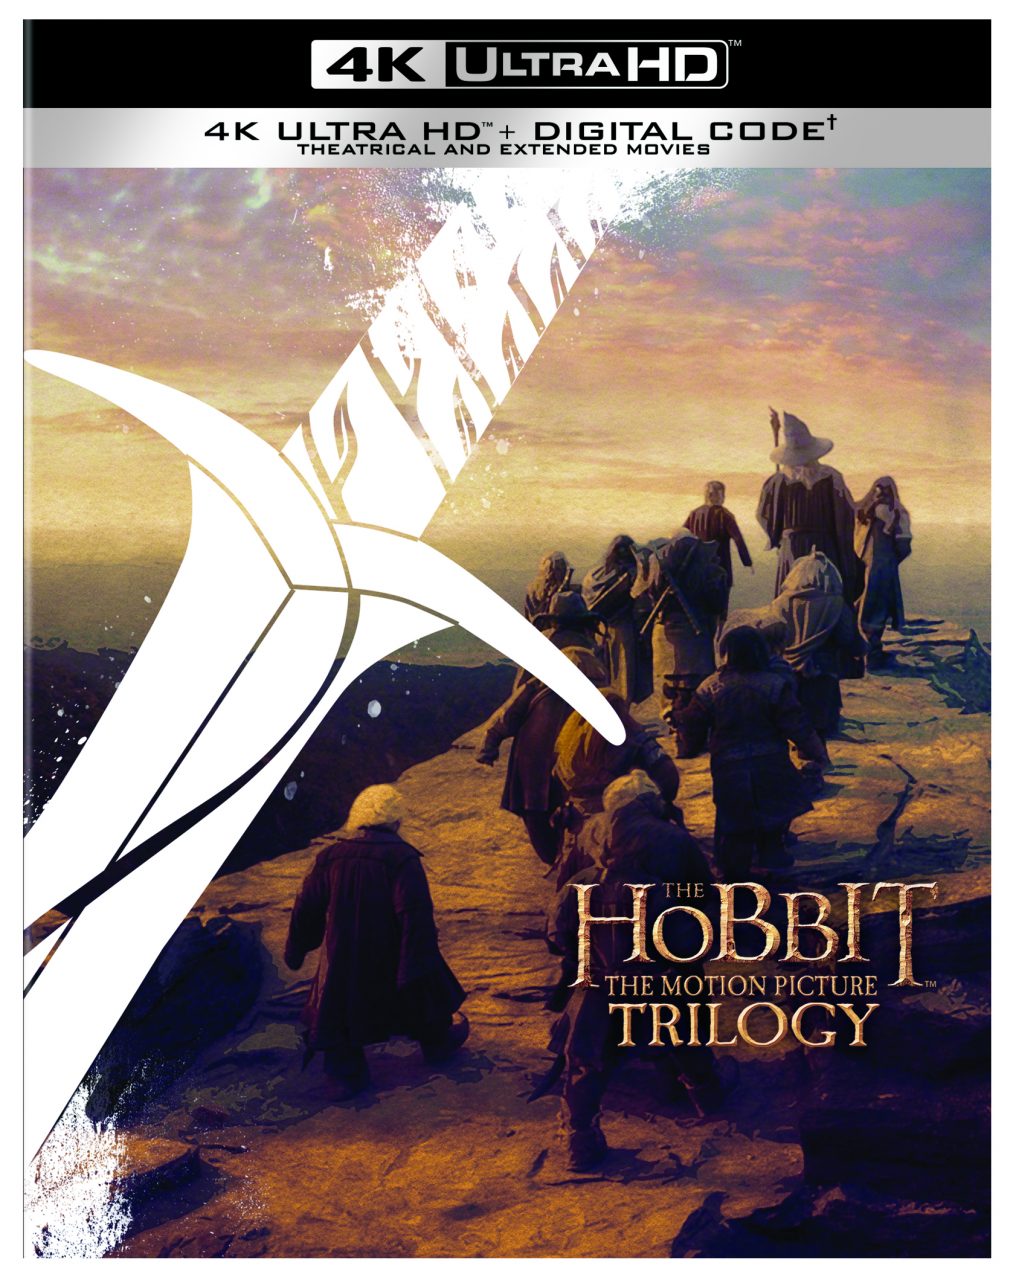 The Hobbit Trilogy 4K Ultra HD Combo Pack cover (Warner Bros. Home Entertainment)